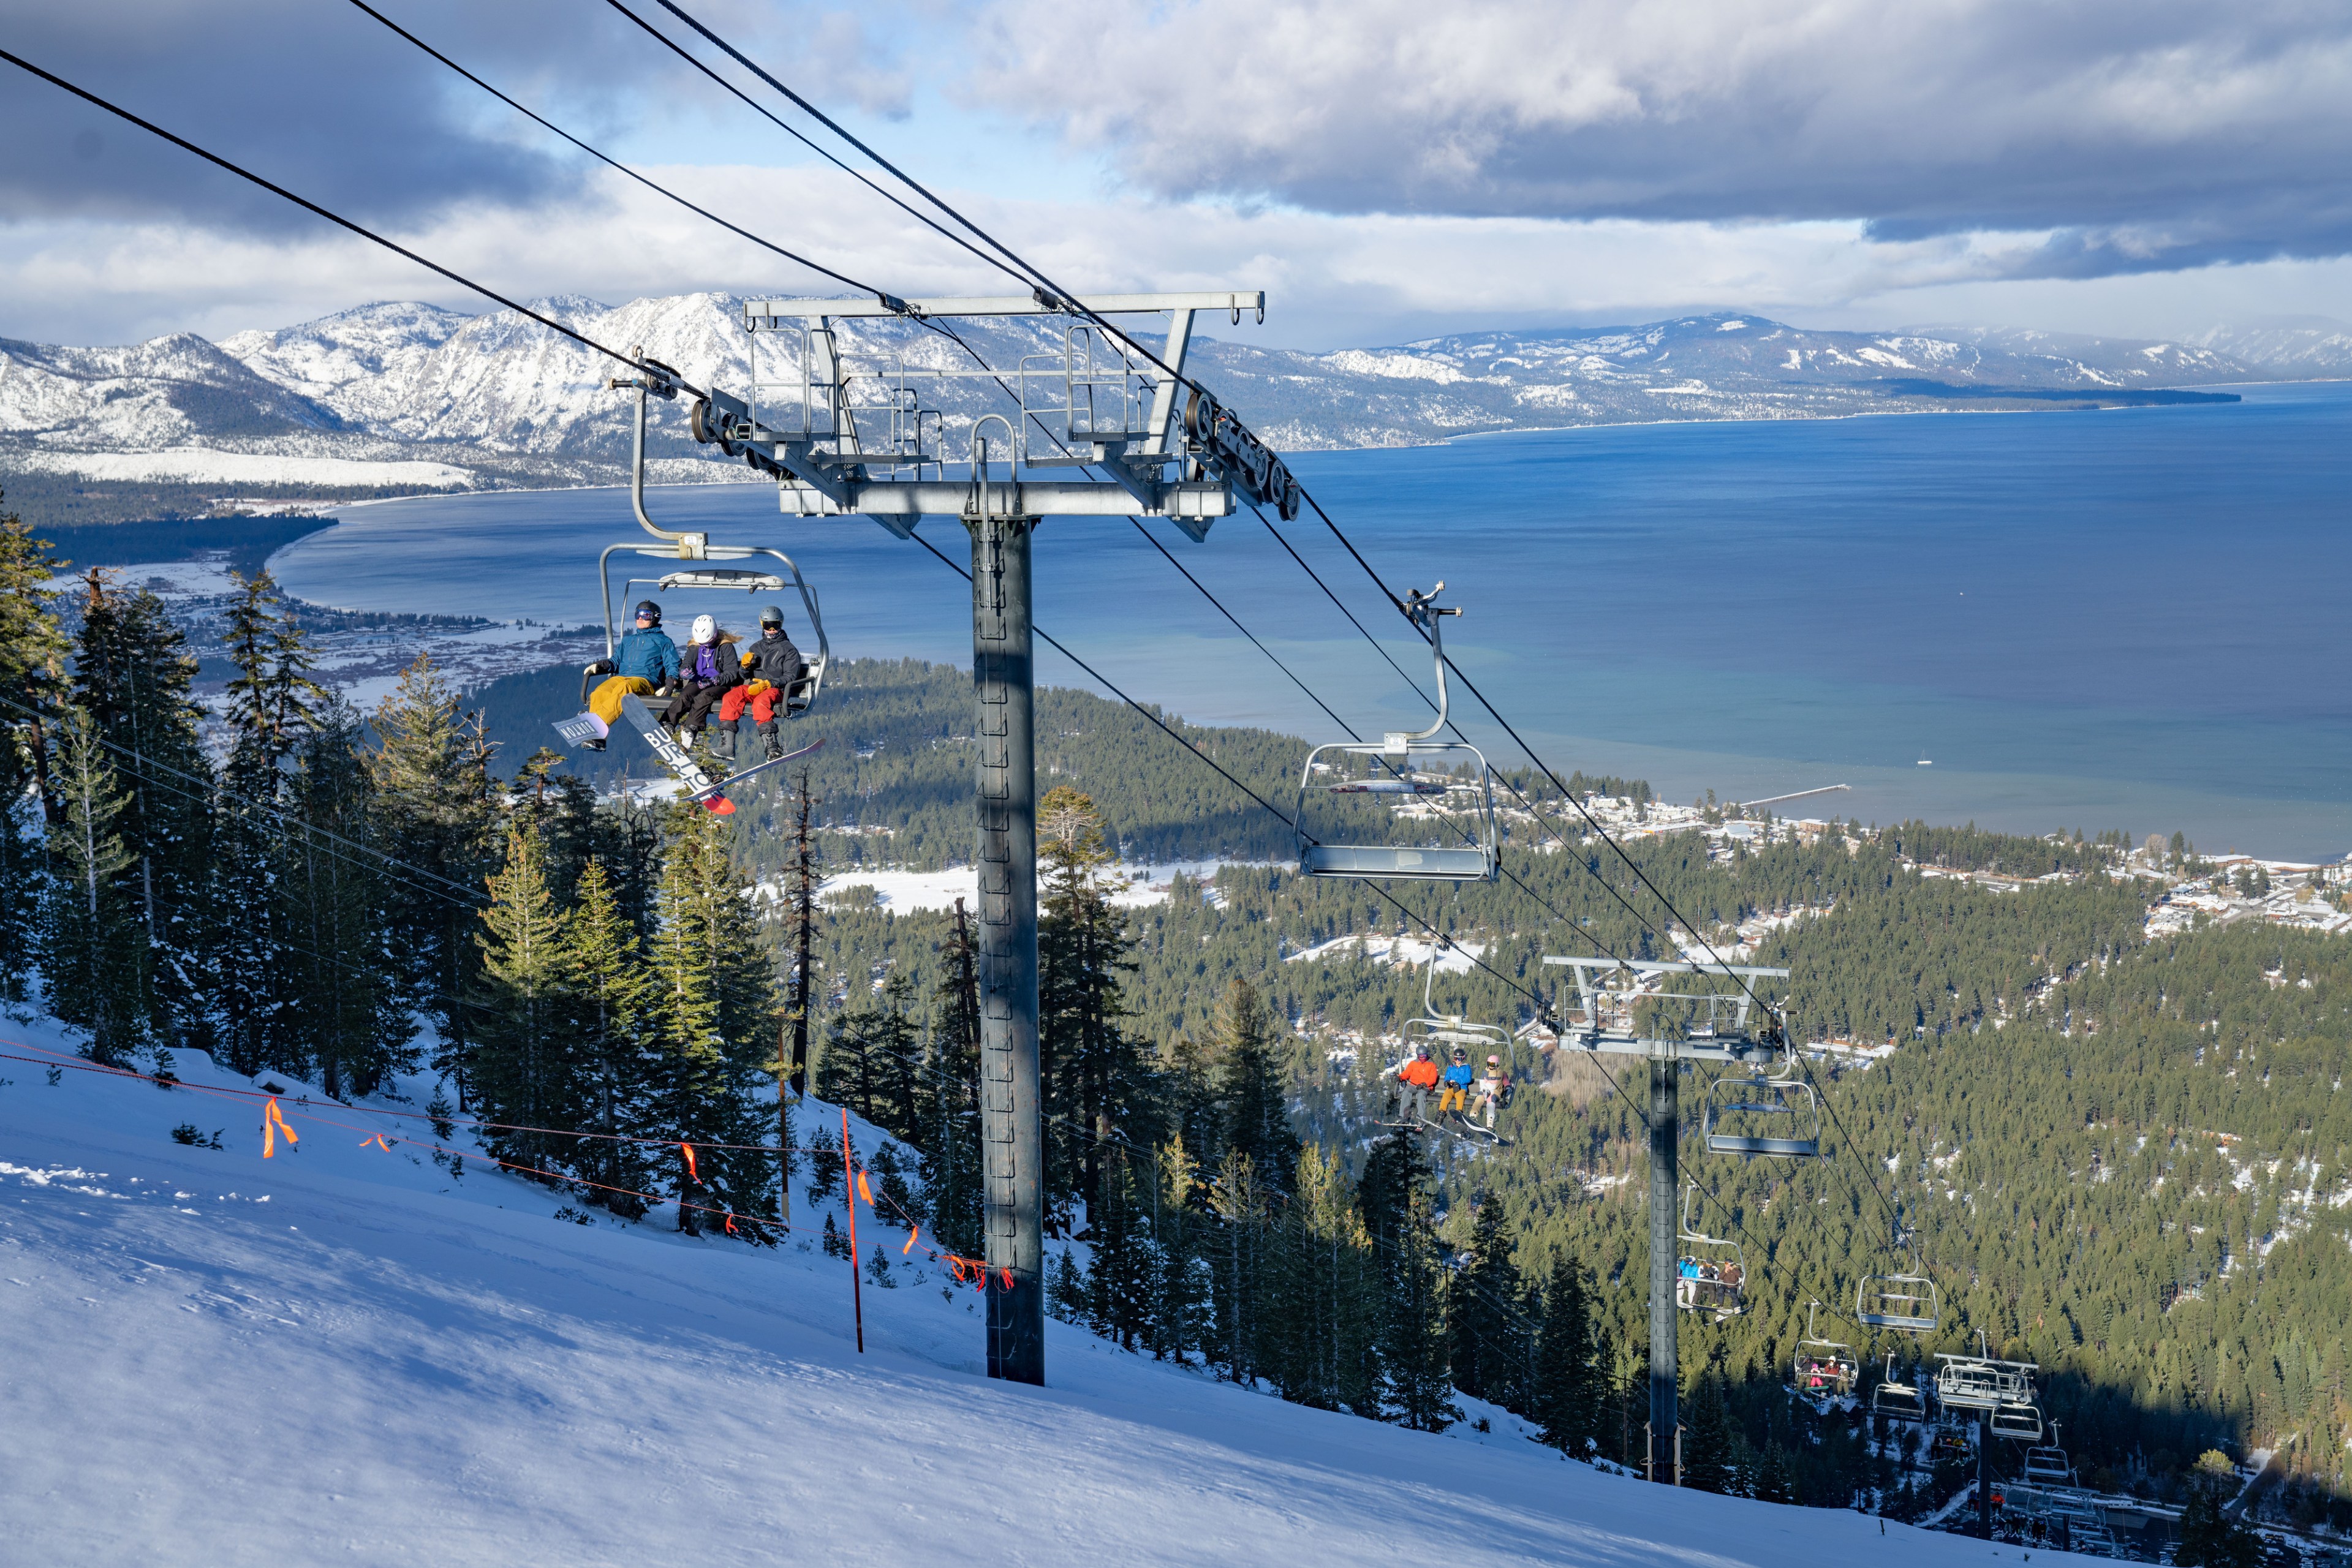 Skiiers ride a lift overlooking a snowy mountain and a lake in the distance.